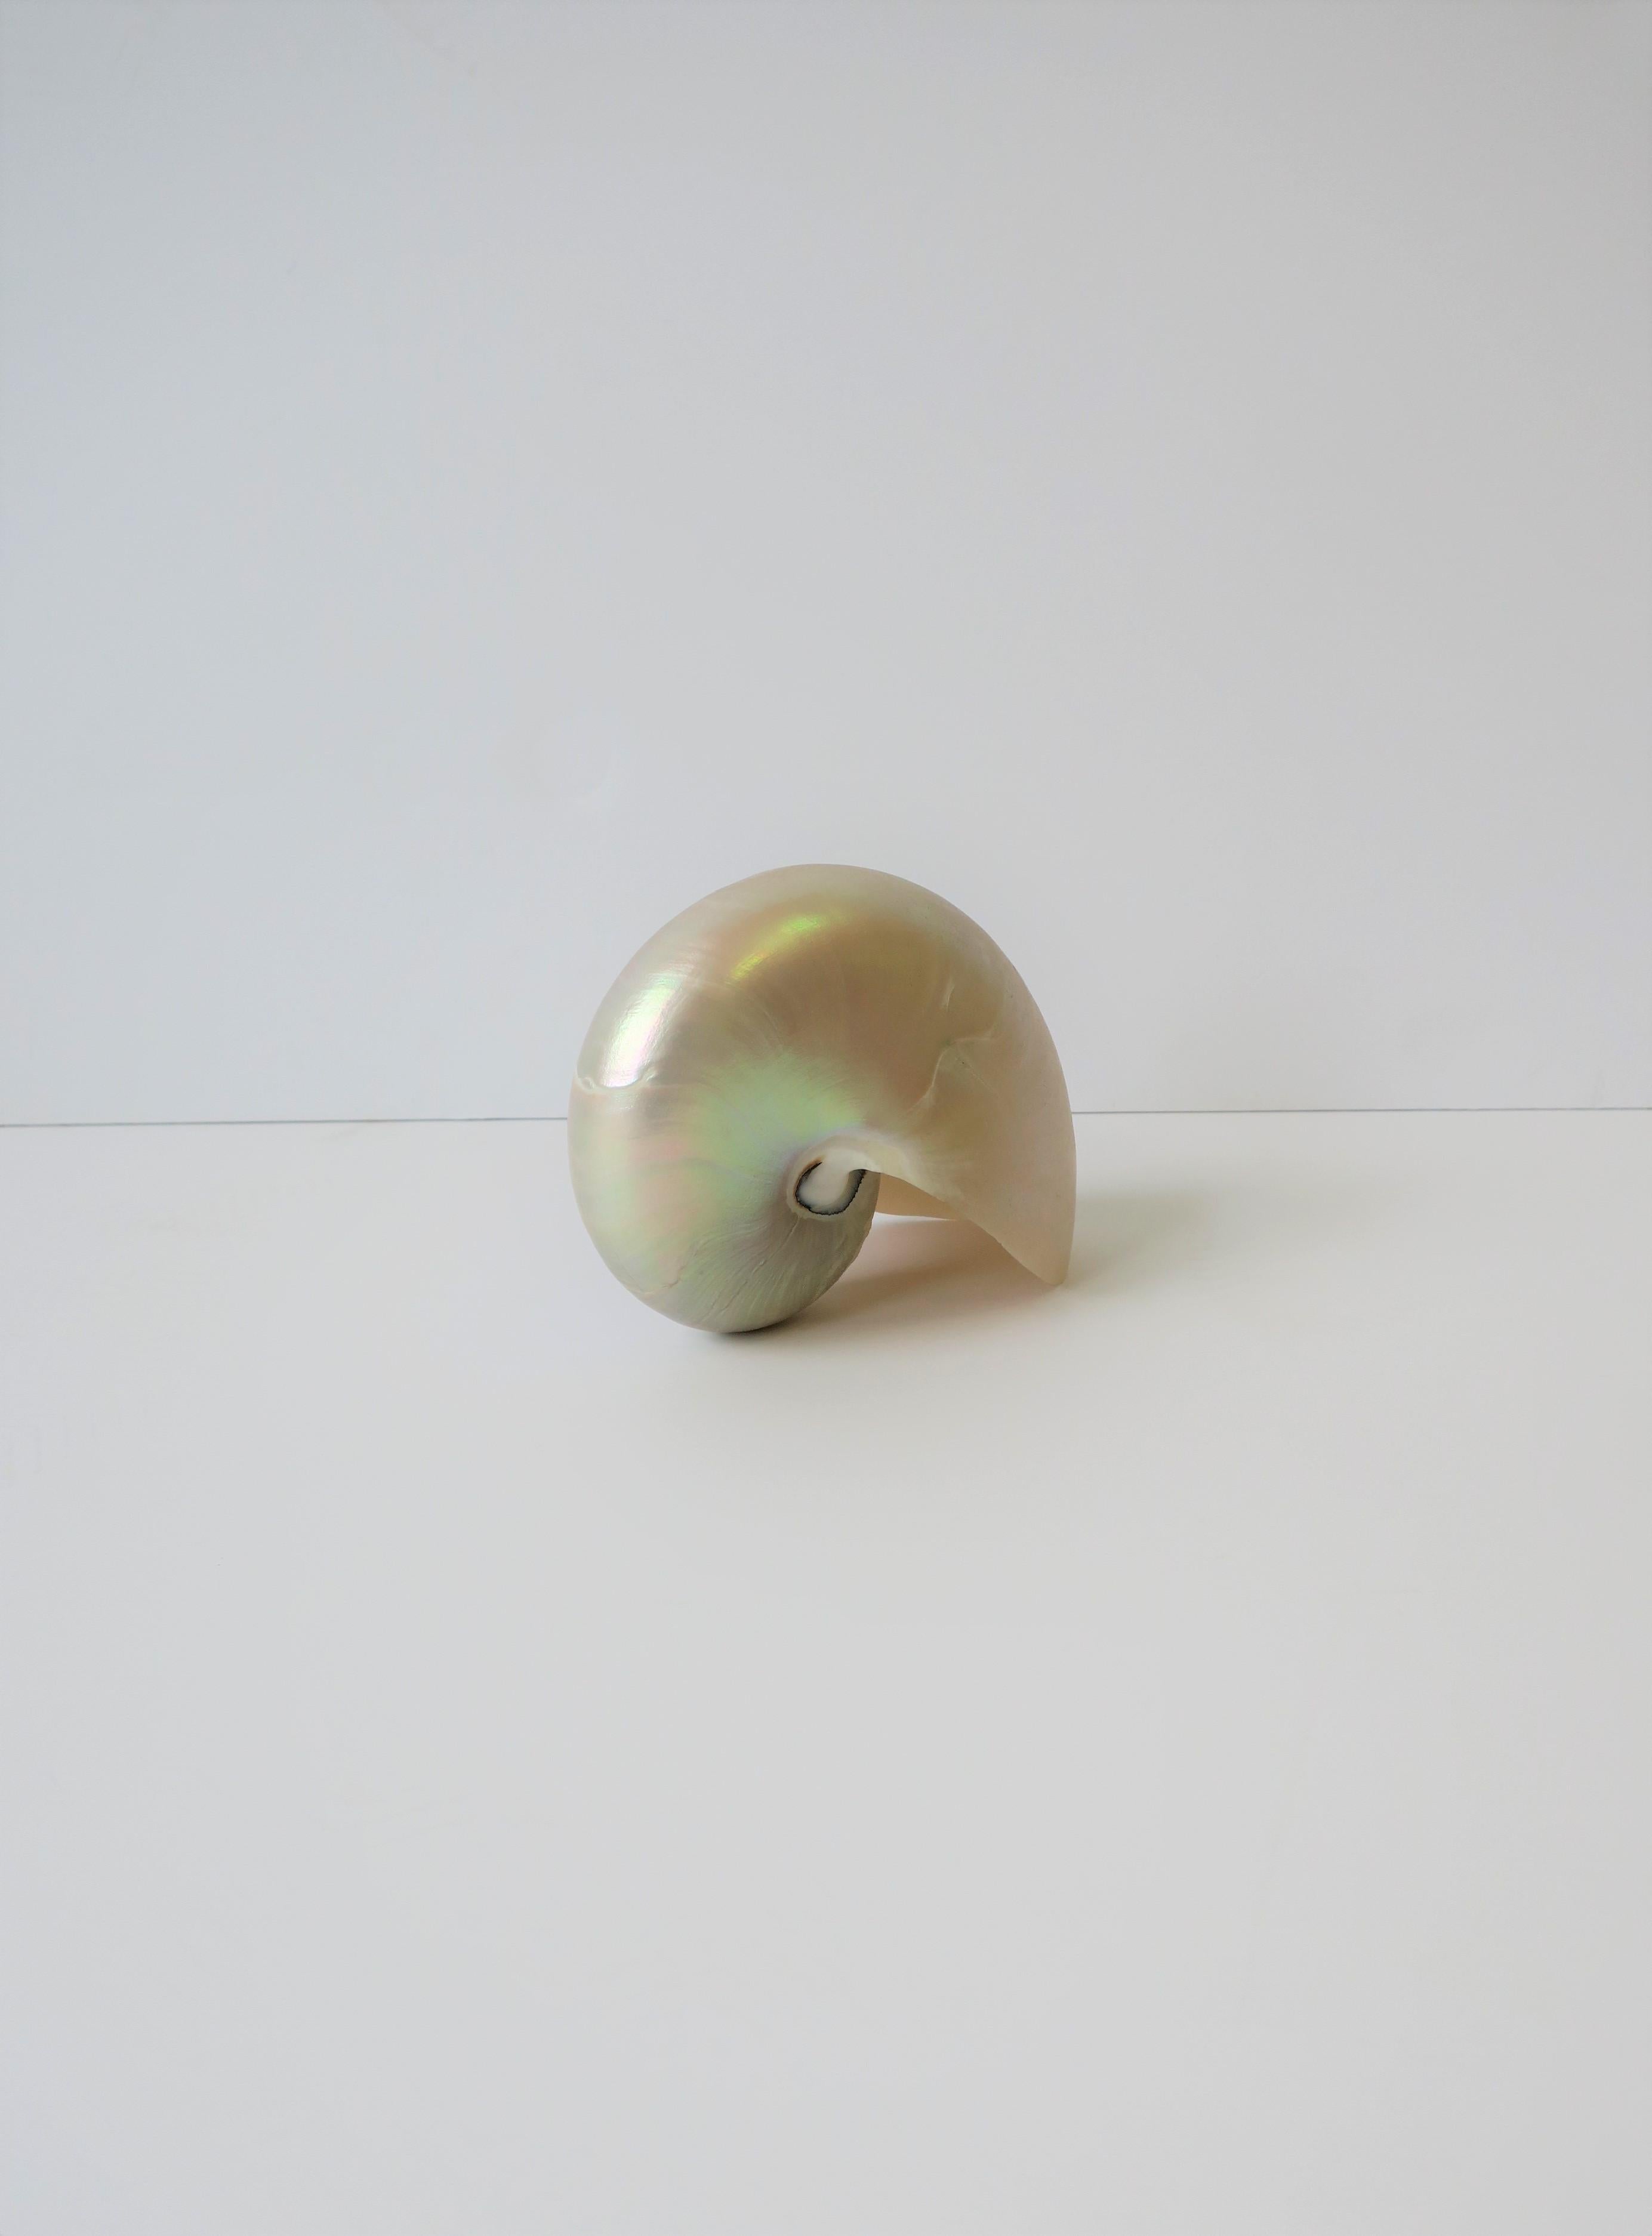 White Mother-of-Pearl Nautilus Sea Shell 1